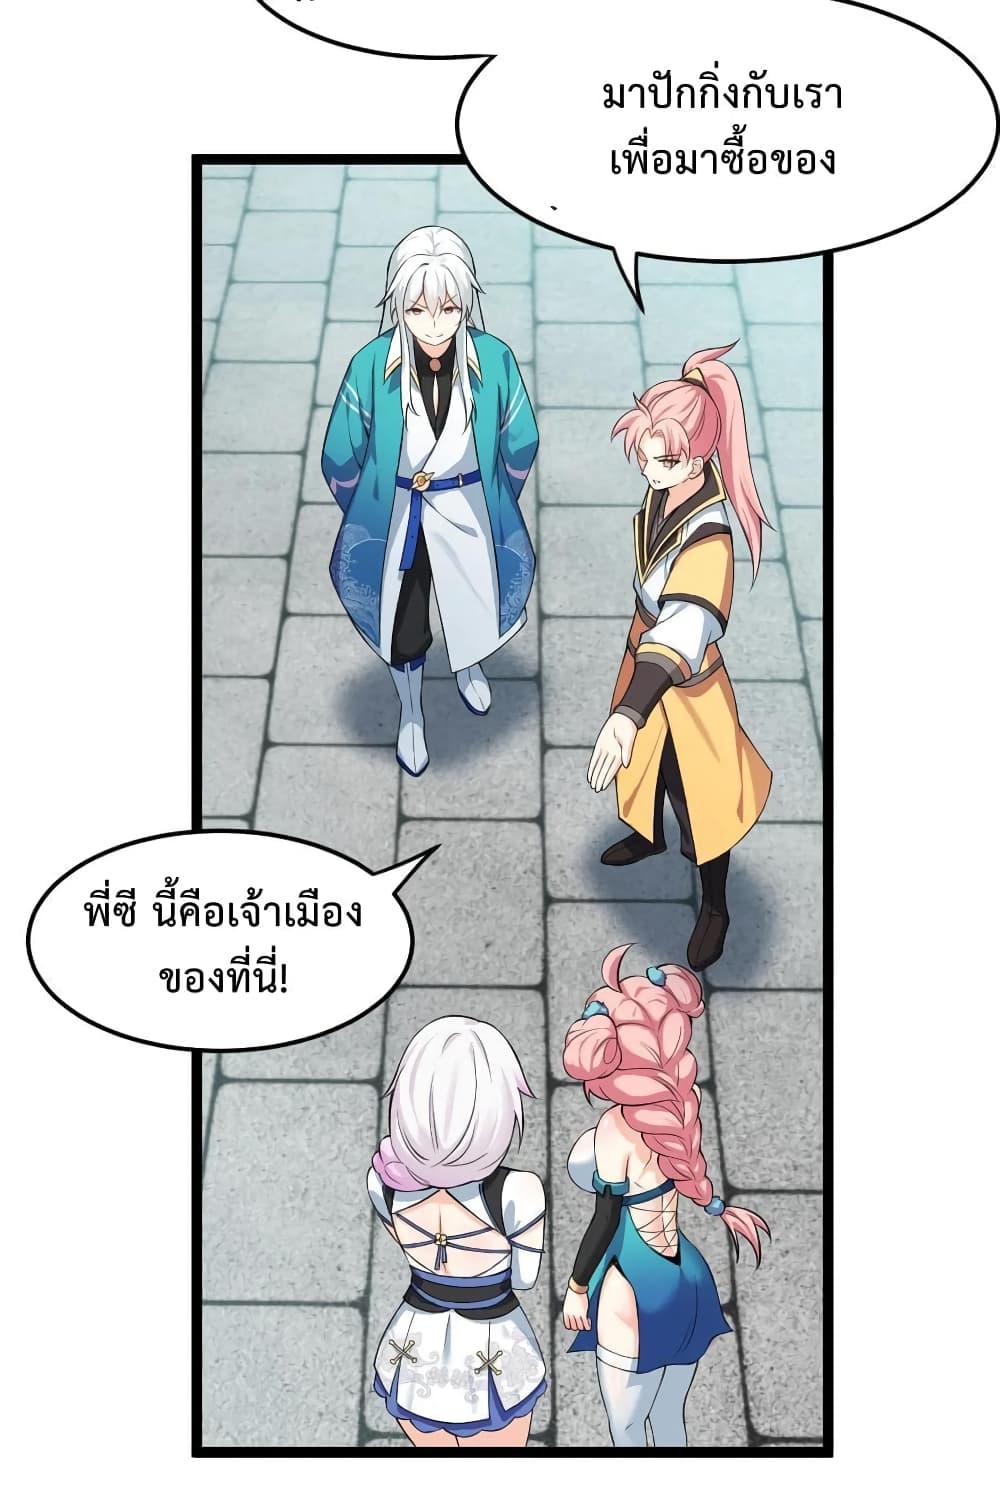 Godsian Masian from Another World ตอนที่ 97 (5)